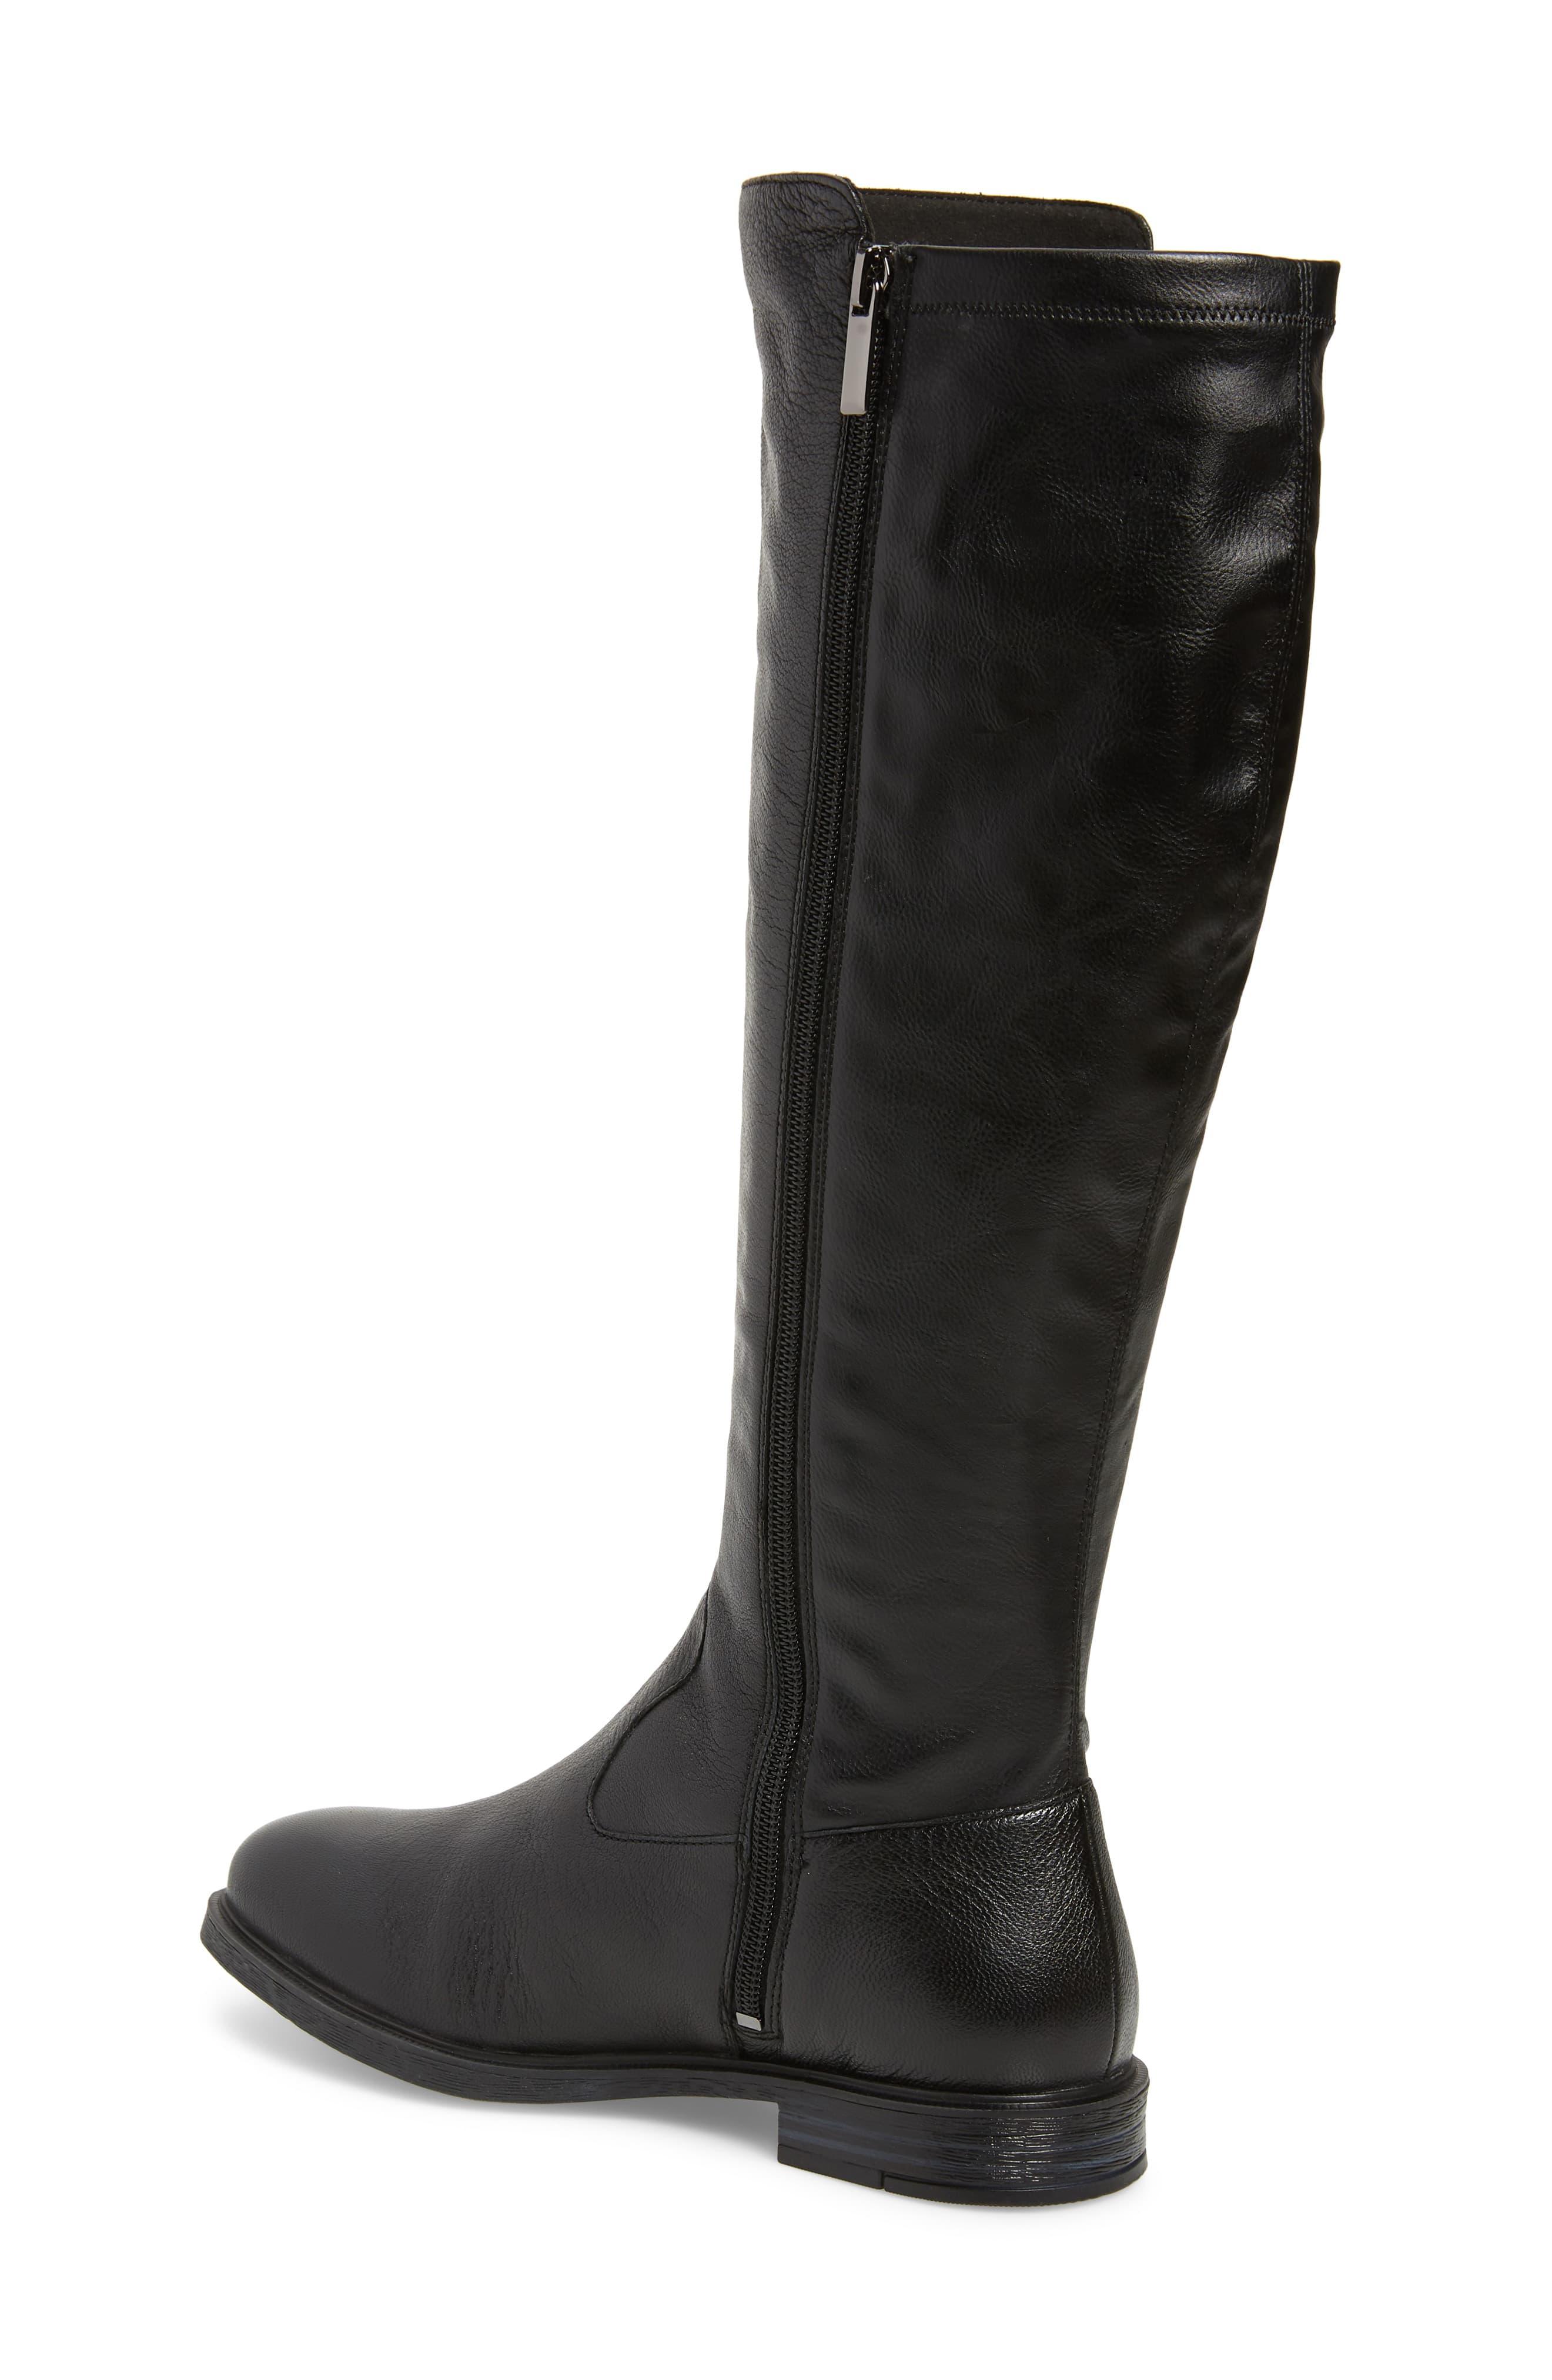 Hush Puppies Bailey Water Resistant Knee High Boot in Black Leather ...